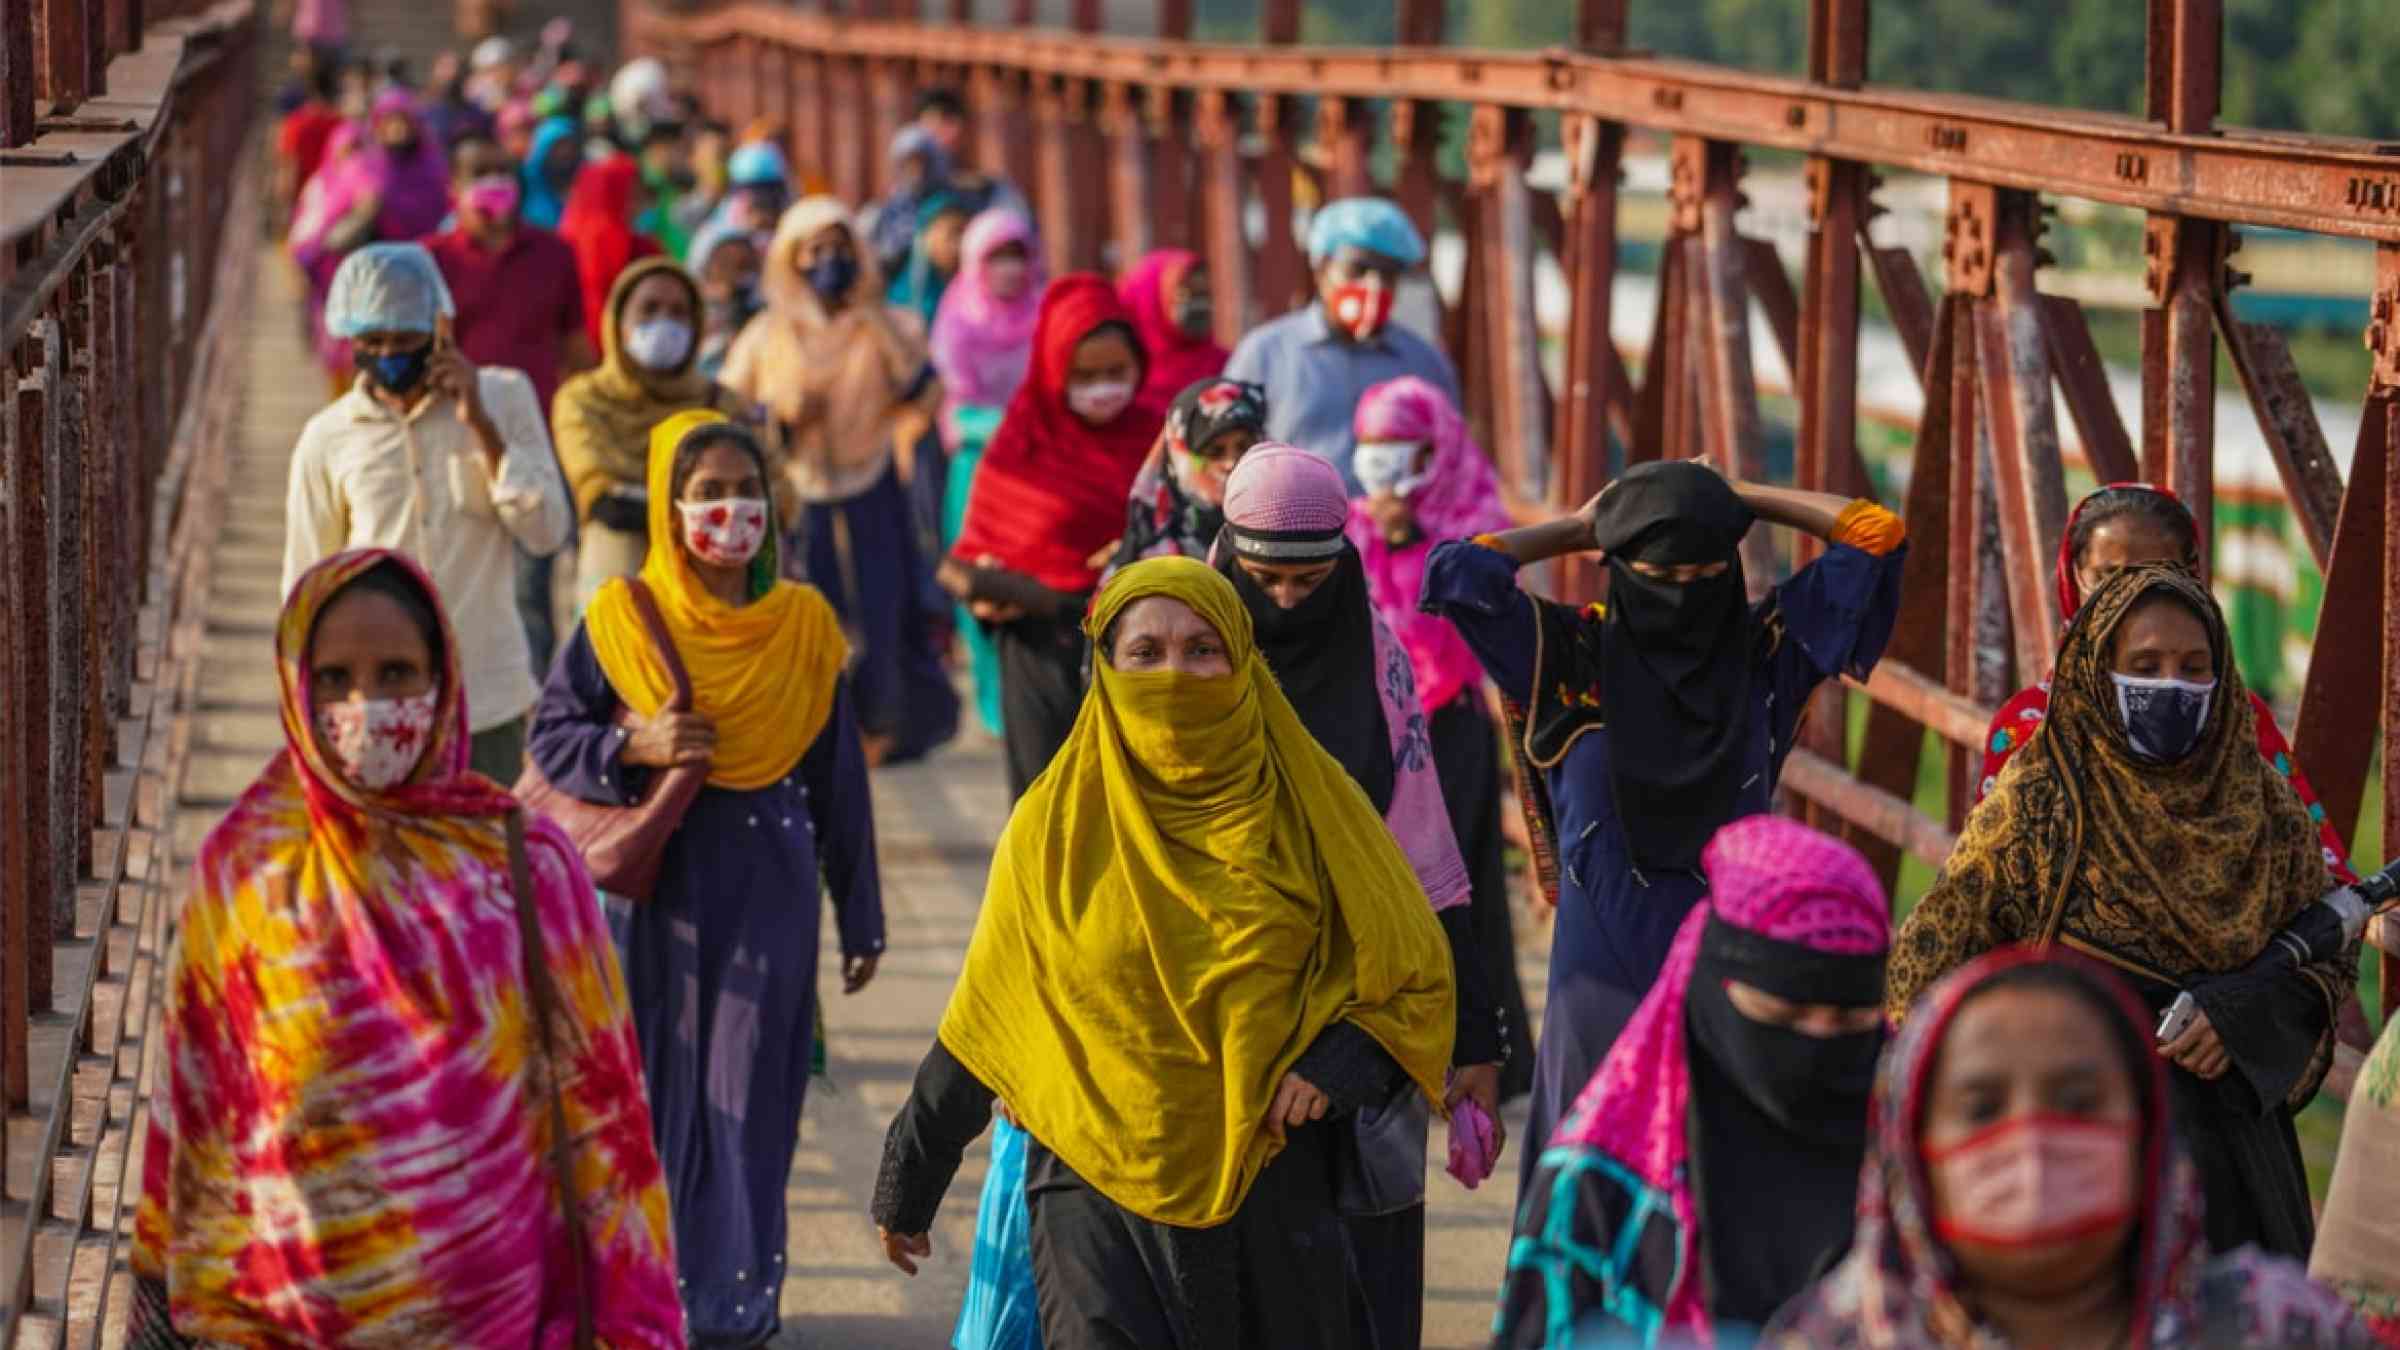 Garment workers wearing face masks walking on the street as they go home during the COVID-19 coronavirus pandemic in Dhaka, Bangladesh (2020)